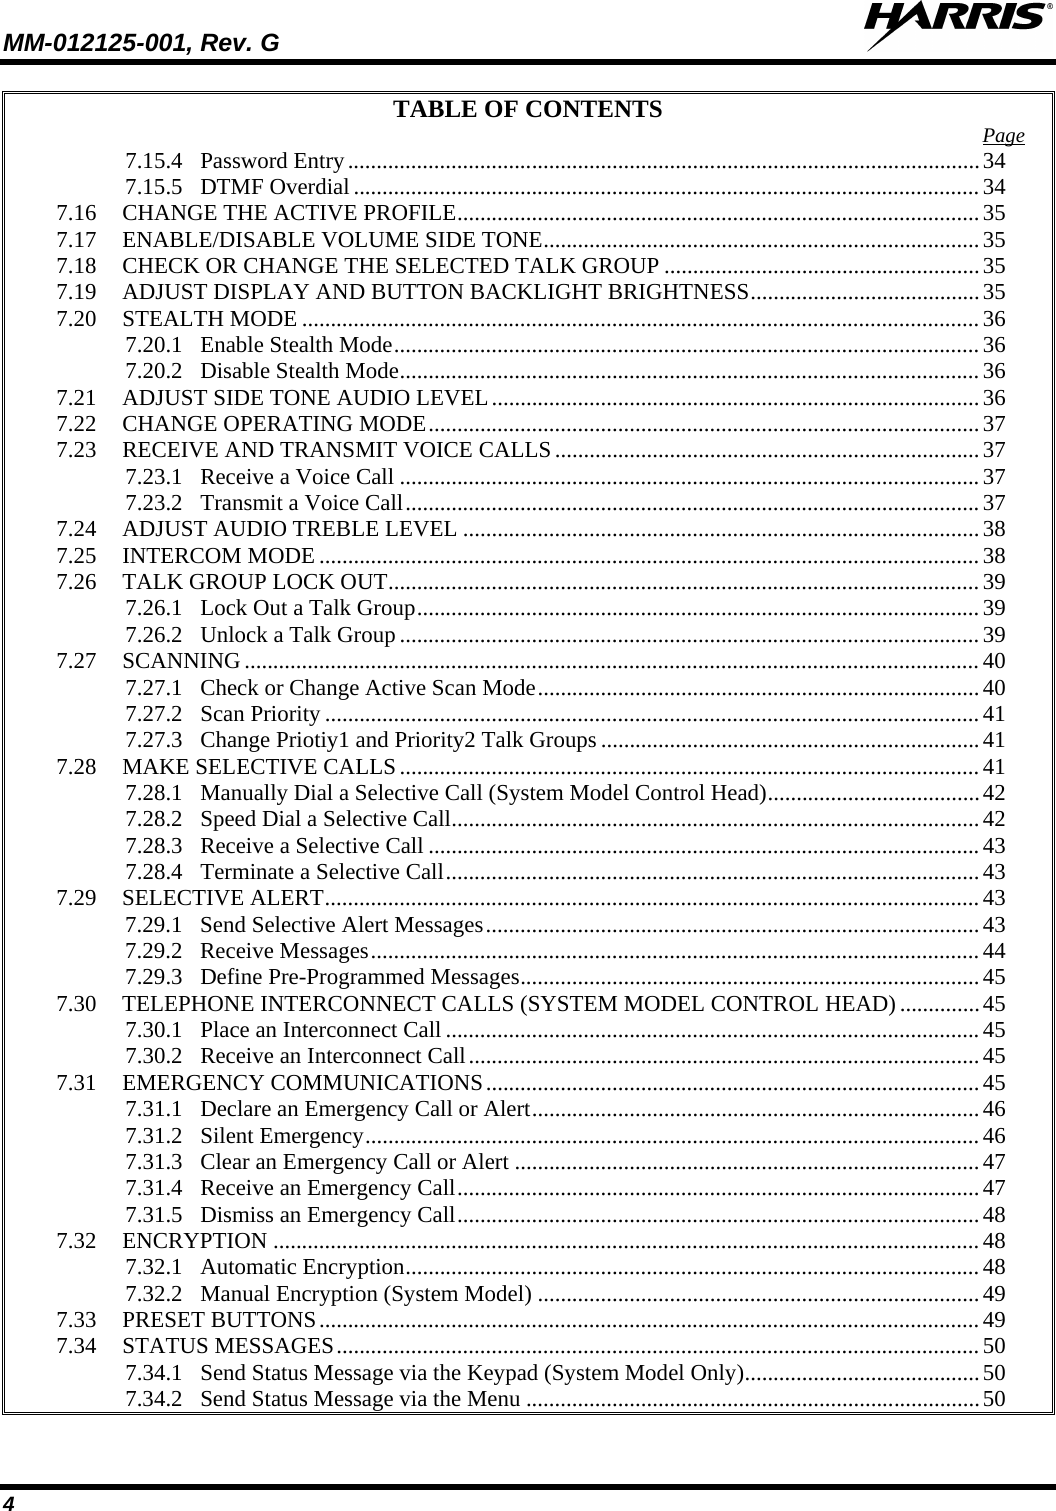 MM-012125-001, Rev. G   4 TABLE OF CONTENTS 7.15.4 Password Entry .............................................................................................................. 34Page  7.15.5 DTMF Overdial ............................................................................................................. 34 7.16 CHANGE THE ACTIVE PROFILE ........................................................................................... 35 7.17 ENABLE/DISABLE VOLUME SIDE TONE ............................................................................ 35 7.18 CHECK OR CHANGE THE SELECTED TALK GROUP ....................................................... 35 7.19 ADJUST DISPLAY AND BUTTON BACKLIGHT BRIGHTNESS ........................................ 35 7.20 STEALTH MODE ...................................................................................................................... 36 7.20.1 Enable Stealth Mode ...................................................................................................... 36 7.20.2 Disable Stealth Mode ..................................................................................................... 36 7.21 ADJUST SIDE TONE AUDIO LEVEL ..................................................................................... 36 7.22 CHANGE OPERATING MODE ................................................................................................ 37 7.23 RECEIVE AND TRANSMIT VOICE CALLS .......................................................................... 37 7.23.1 Receive a Voice Call ..................................................................................................... 37 7.23.2 Transmit a Voice Call .................................................................................................... 37 7.24 ADJUST AUDIO TREBLE LEVEL .......................................................................................... 38 7.25 INTERCOM MODE ................................................................................................................... 38 7.26 TALK GROUP LOCK OUT ....................................................................................................... 39 7.26.1 Lock Out a Talk Group .................................................................................................. 39 7.26.2 Unlock a Talk Group ..................................................................................................... 39 7.27 SCANNING ................................................................................................................................ 40 7.27.1 Check or Change Active Scan Mode ............................................................................. 40 7.27.2 Scan Priority .................................................................................................................. 41 7.27.3 Change Priotiy1 and Priority2 Talk Groups .................................................................. 41 7.28 MAKE SELECTIVE CALLS ..................................................................................................... 41 7.28.1 Manually Dial a Selective Call (System Model Control Head) ..................................... 42 7.28.2 Speed Dial a Selective Call ............................................................................................ 42 7.28.3 Receive a Selective Call ................................................................................................ 43 7.28.4 Terminate a Selective Call ............................................................................................. 43 7.29 SELECTIVE ALERT .................................................................................................................. 43 7.29.1 Send Selective Alert Messages ...................................................................................... 43 7.29.2 Receive Messages .......................................................................................................... 44 7.29.3 Define Pre-Programmed Messages ................................................................................ 45 7.30 TELEPHONE INTERCONNECT CALLS (SYSTEM MODEL CONTROL HEAD) .............. 45 7.30.1 Place an Interconnect Call ............................................................................................. 45 7.30.2 Receive an Interconnect Call ......................................................................................... 45 7.31 EMERGENCY COMMUNICATIONS ...................................................................................... 45 7.31.1 Declare an Emergency Call or Alert .............................................................................. 46 7.31.2 Silent Emergency ........................................................................................................... 46 7.31.3 Clear an Emergency Call or Alert ................................................................................. 47 7.31.4 Receive an Emergency Call ........................................................................................... 47 7.31.5 Dismiss an Emergency Call ........................................................................................... 48 7.32 ENCRYPTION ........................................................................................................................... 48 7.32.1 Automatic Encryption .................................................................................................... 48 7.32.2 Manual Encryption (System Model) ............................................................................. 49 7.33 PRESET BUTTONS ................................................................................................................... 49 7.34 STATUS MESSAGES ................................................................................................................ 50 7.34.1 Send Status Message via the Keypad (System Model Only) ......................................... 50 7.34.2 Send Status Message via the Menu ............................................................................... 50 